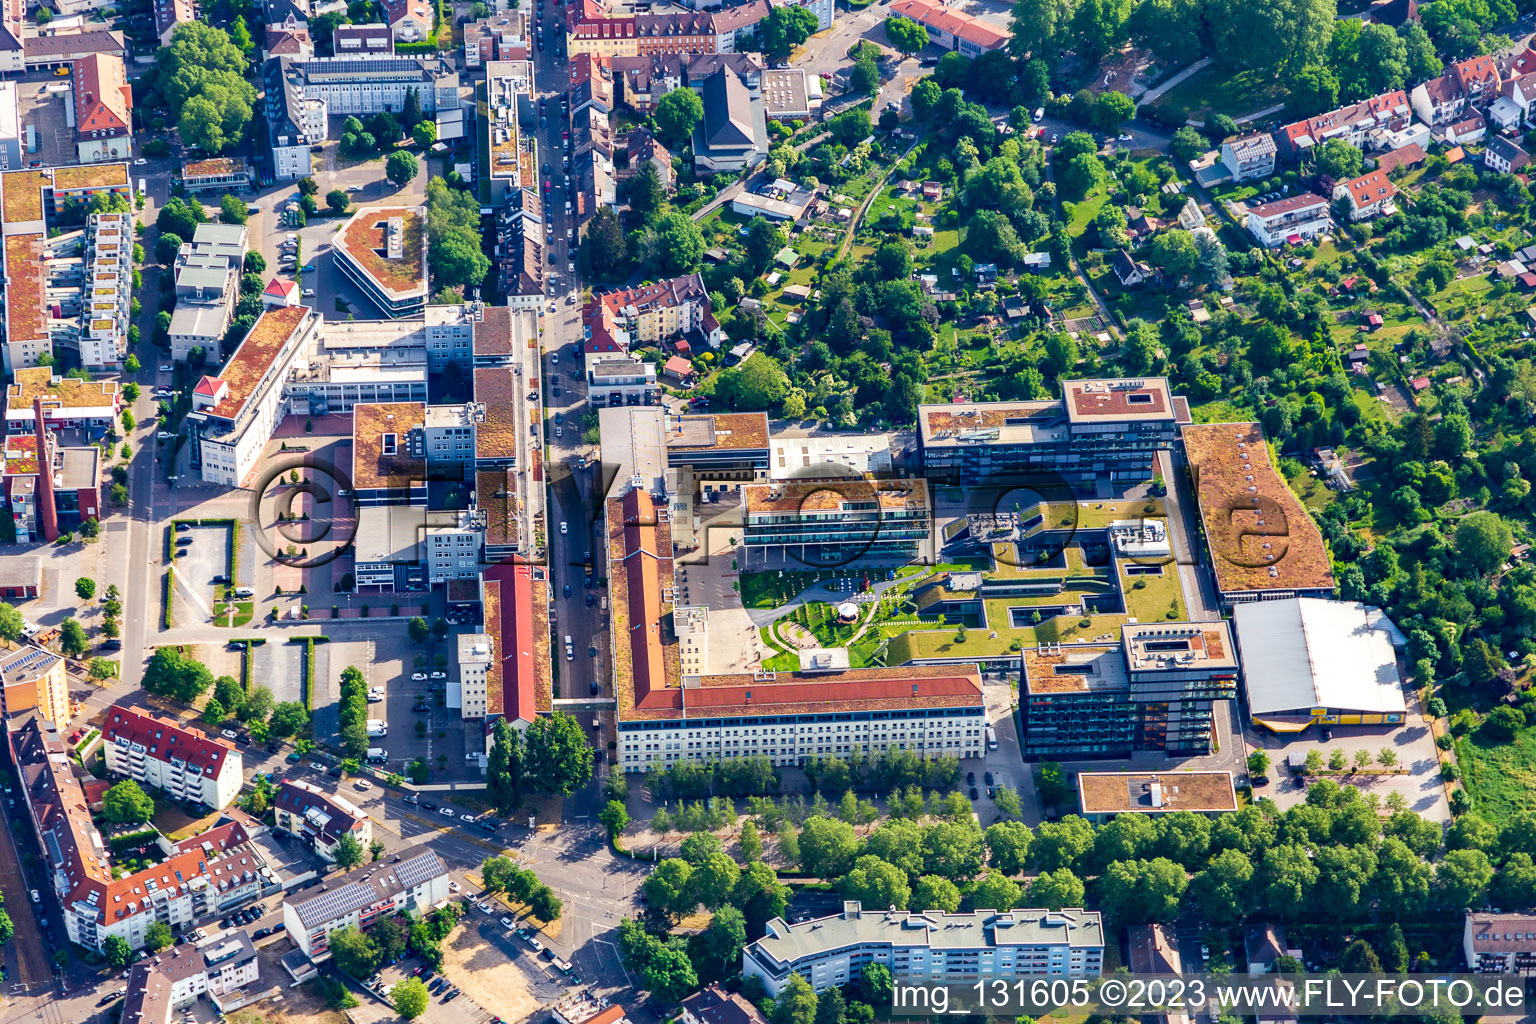 Aerial view of RaumFabrik (former Pfaff site) in the district Durlach in Karlsruhe in the state Baden-Wuerttemberg, Germany